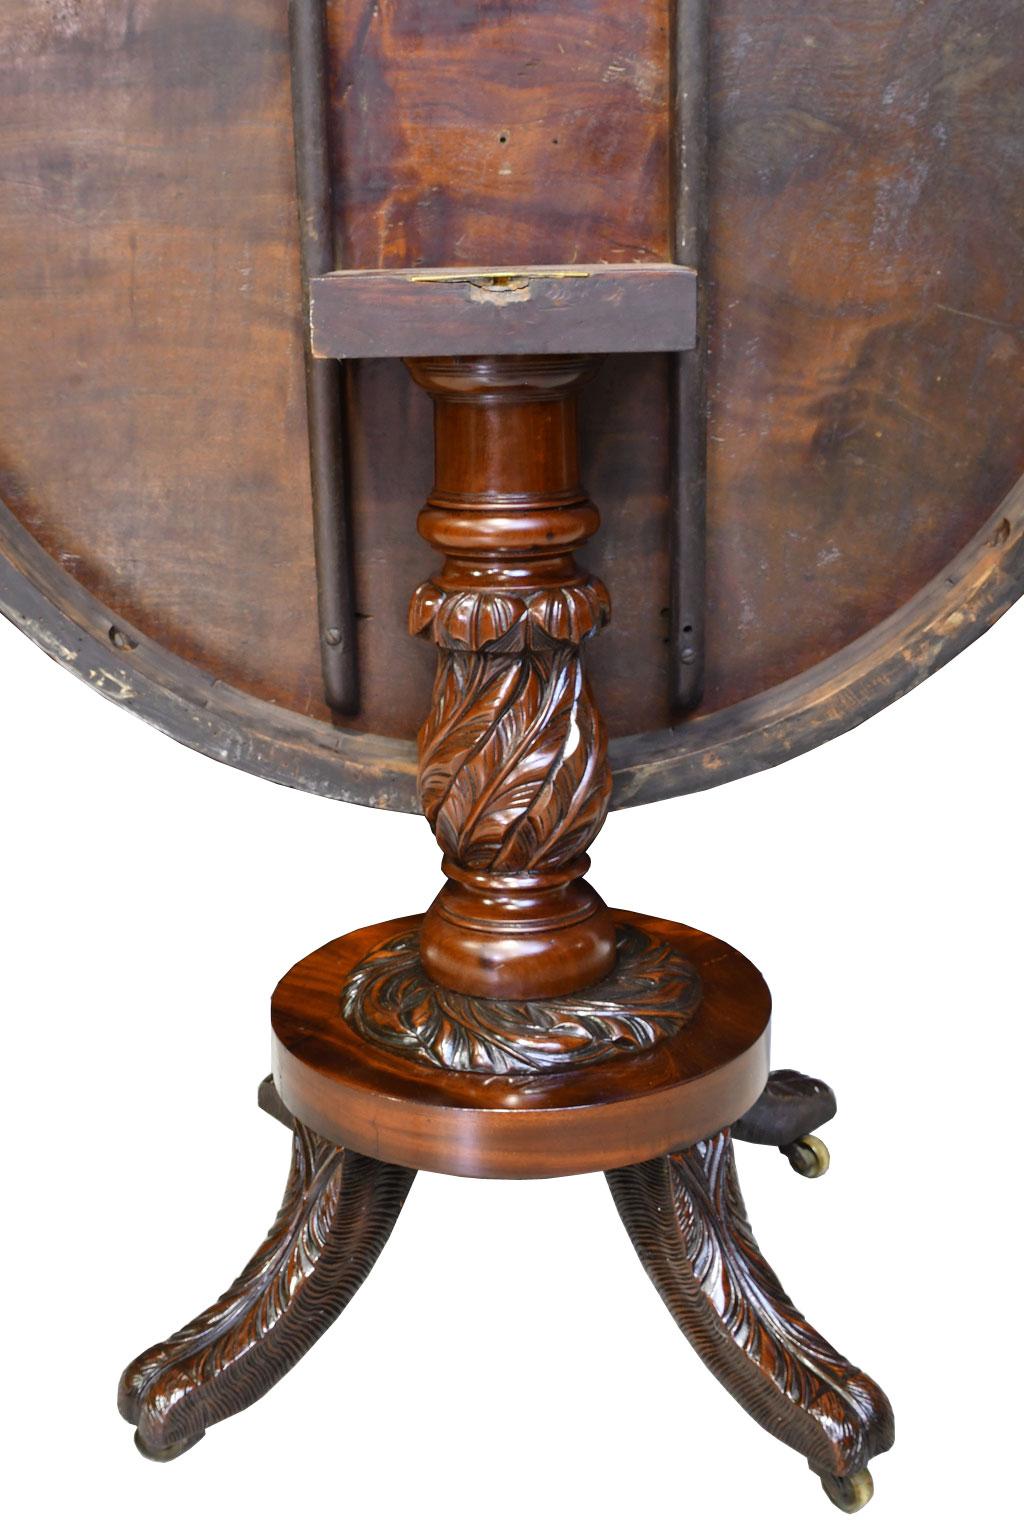 Federal Round Pedestal Table in West Indies Mahogany, New York, circa 1820 3